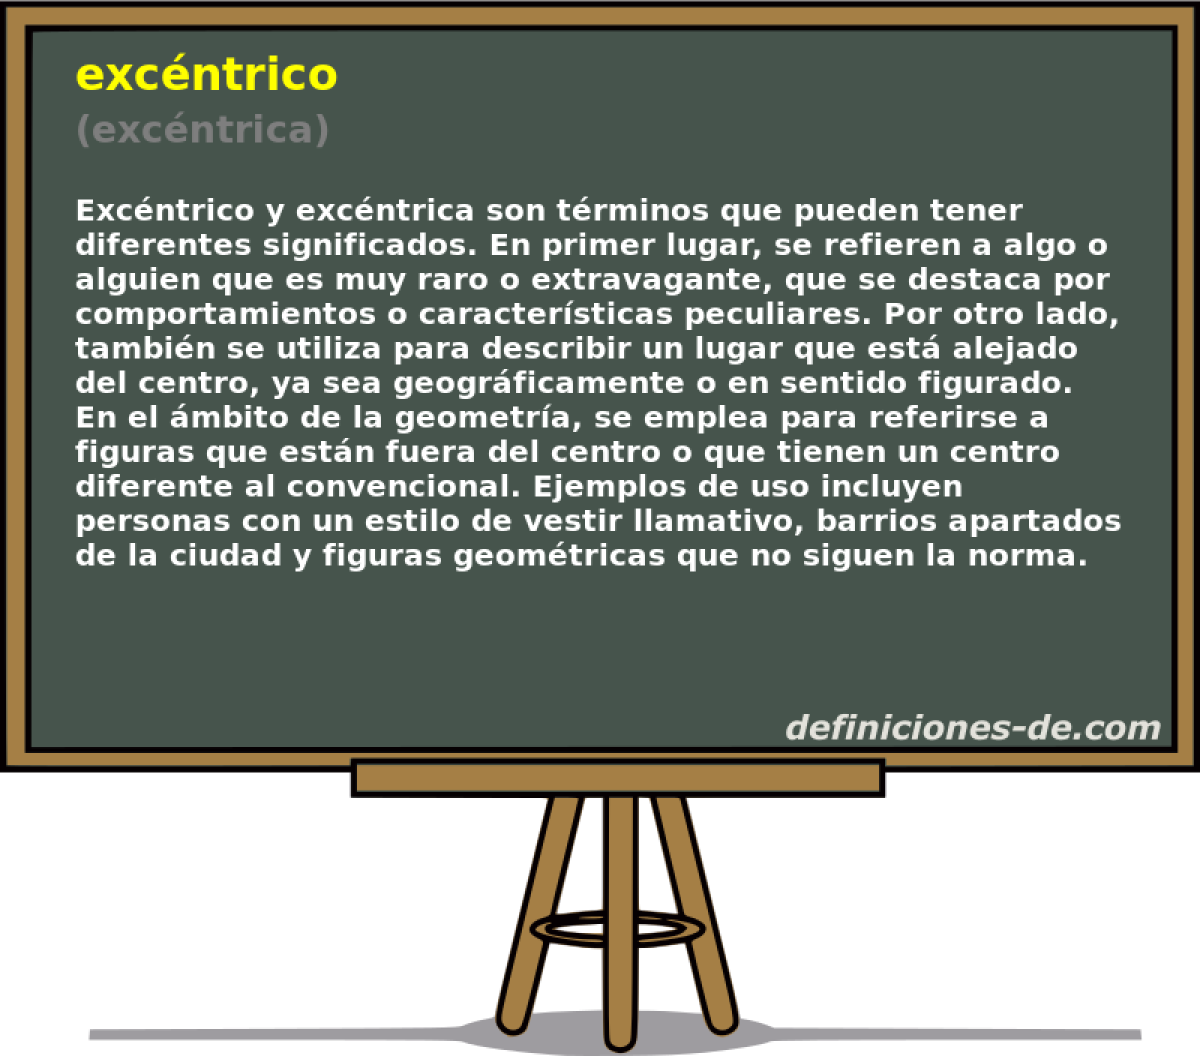 excntrico (excntrica)